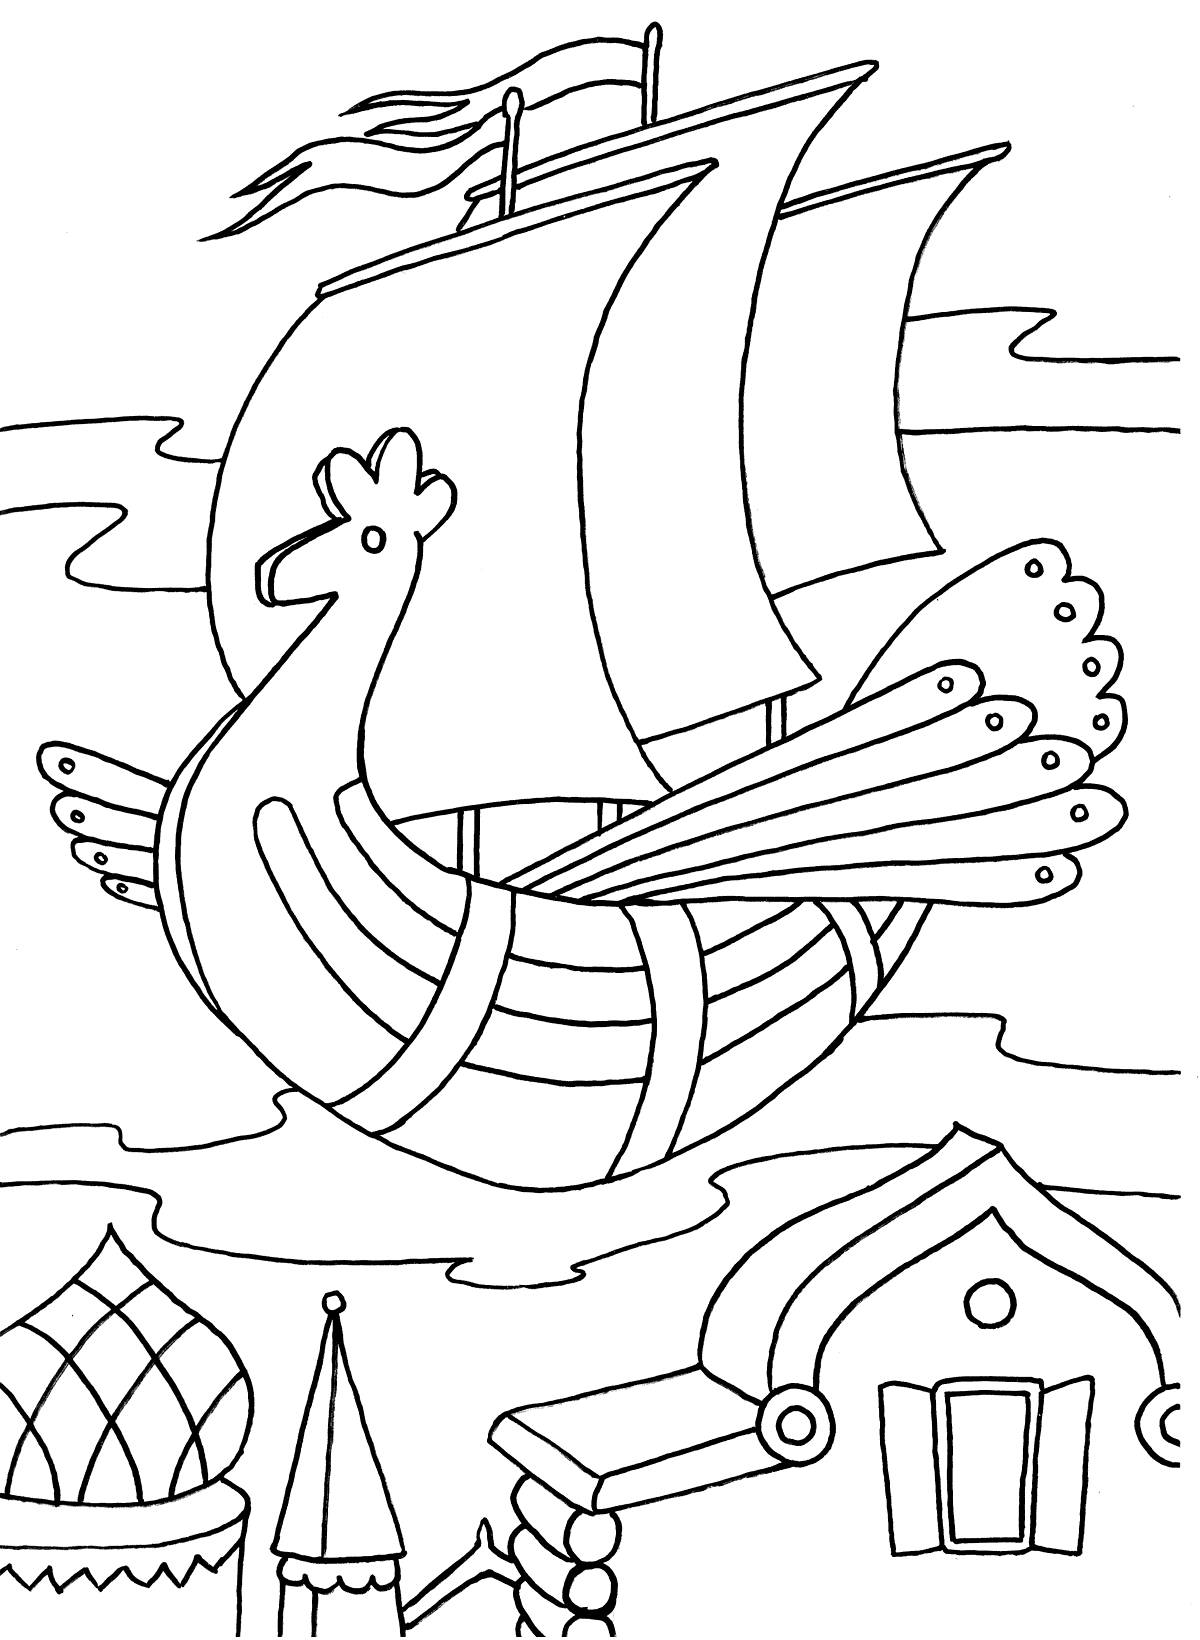 Flying ship coloring page